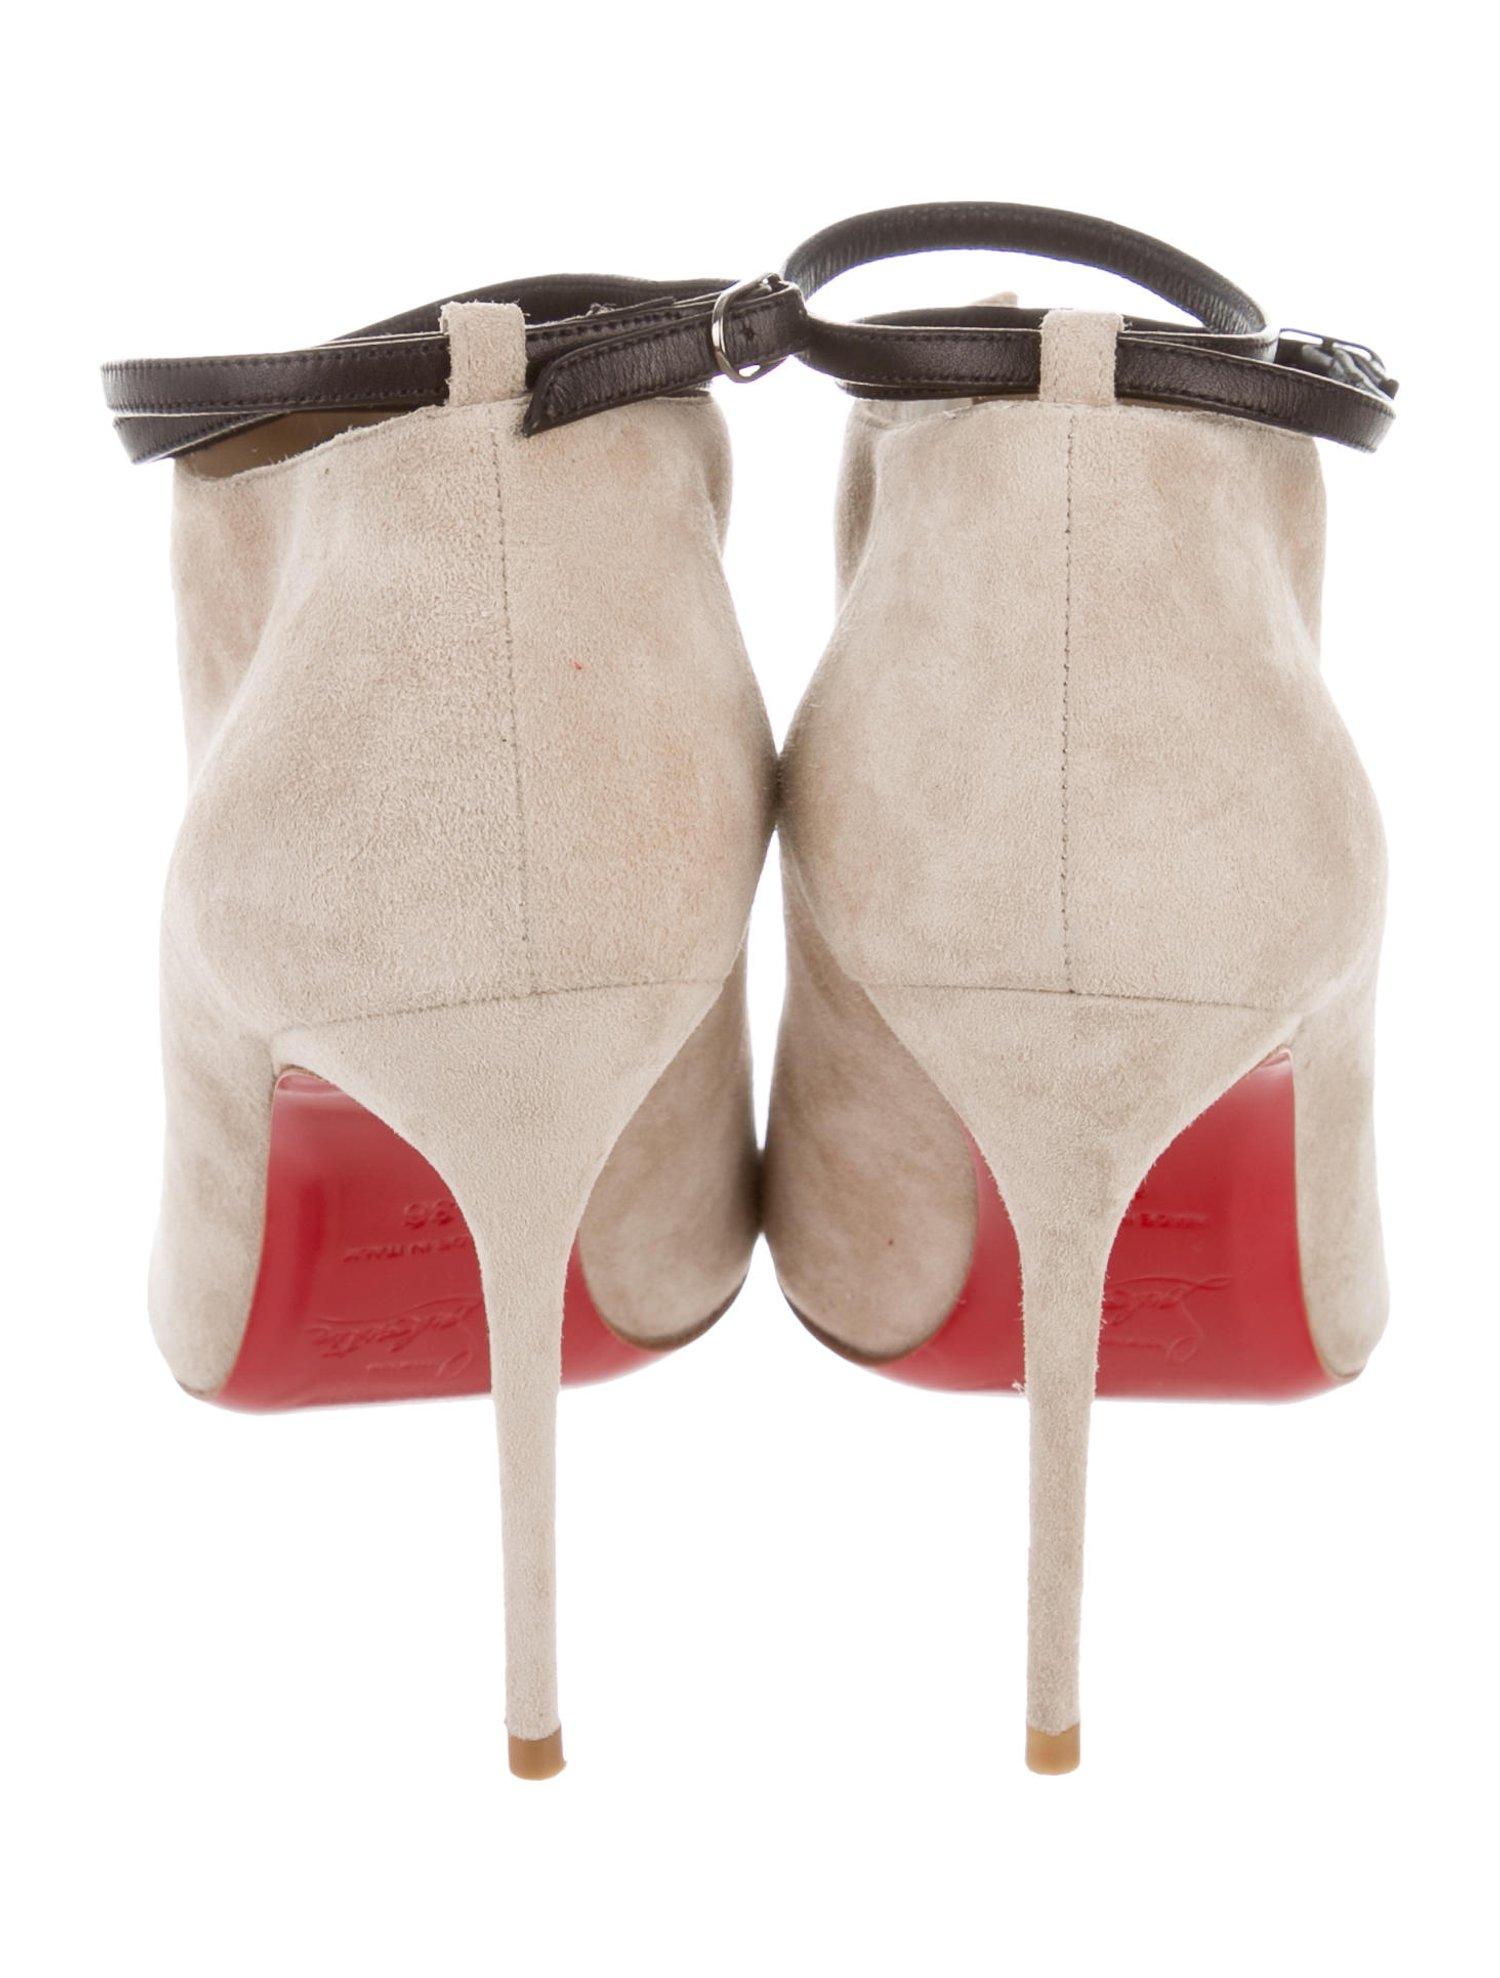 Beige Christian Louboutin NEW Tan Nude Black Leather Slit Suede Evening Boots Booties